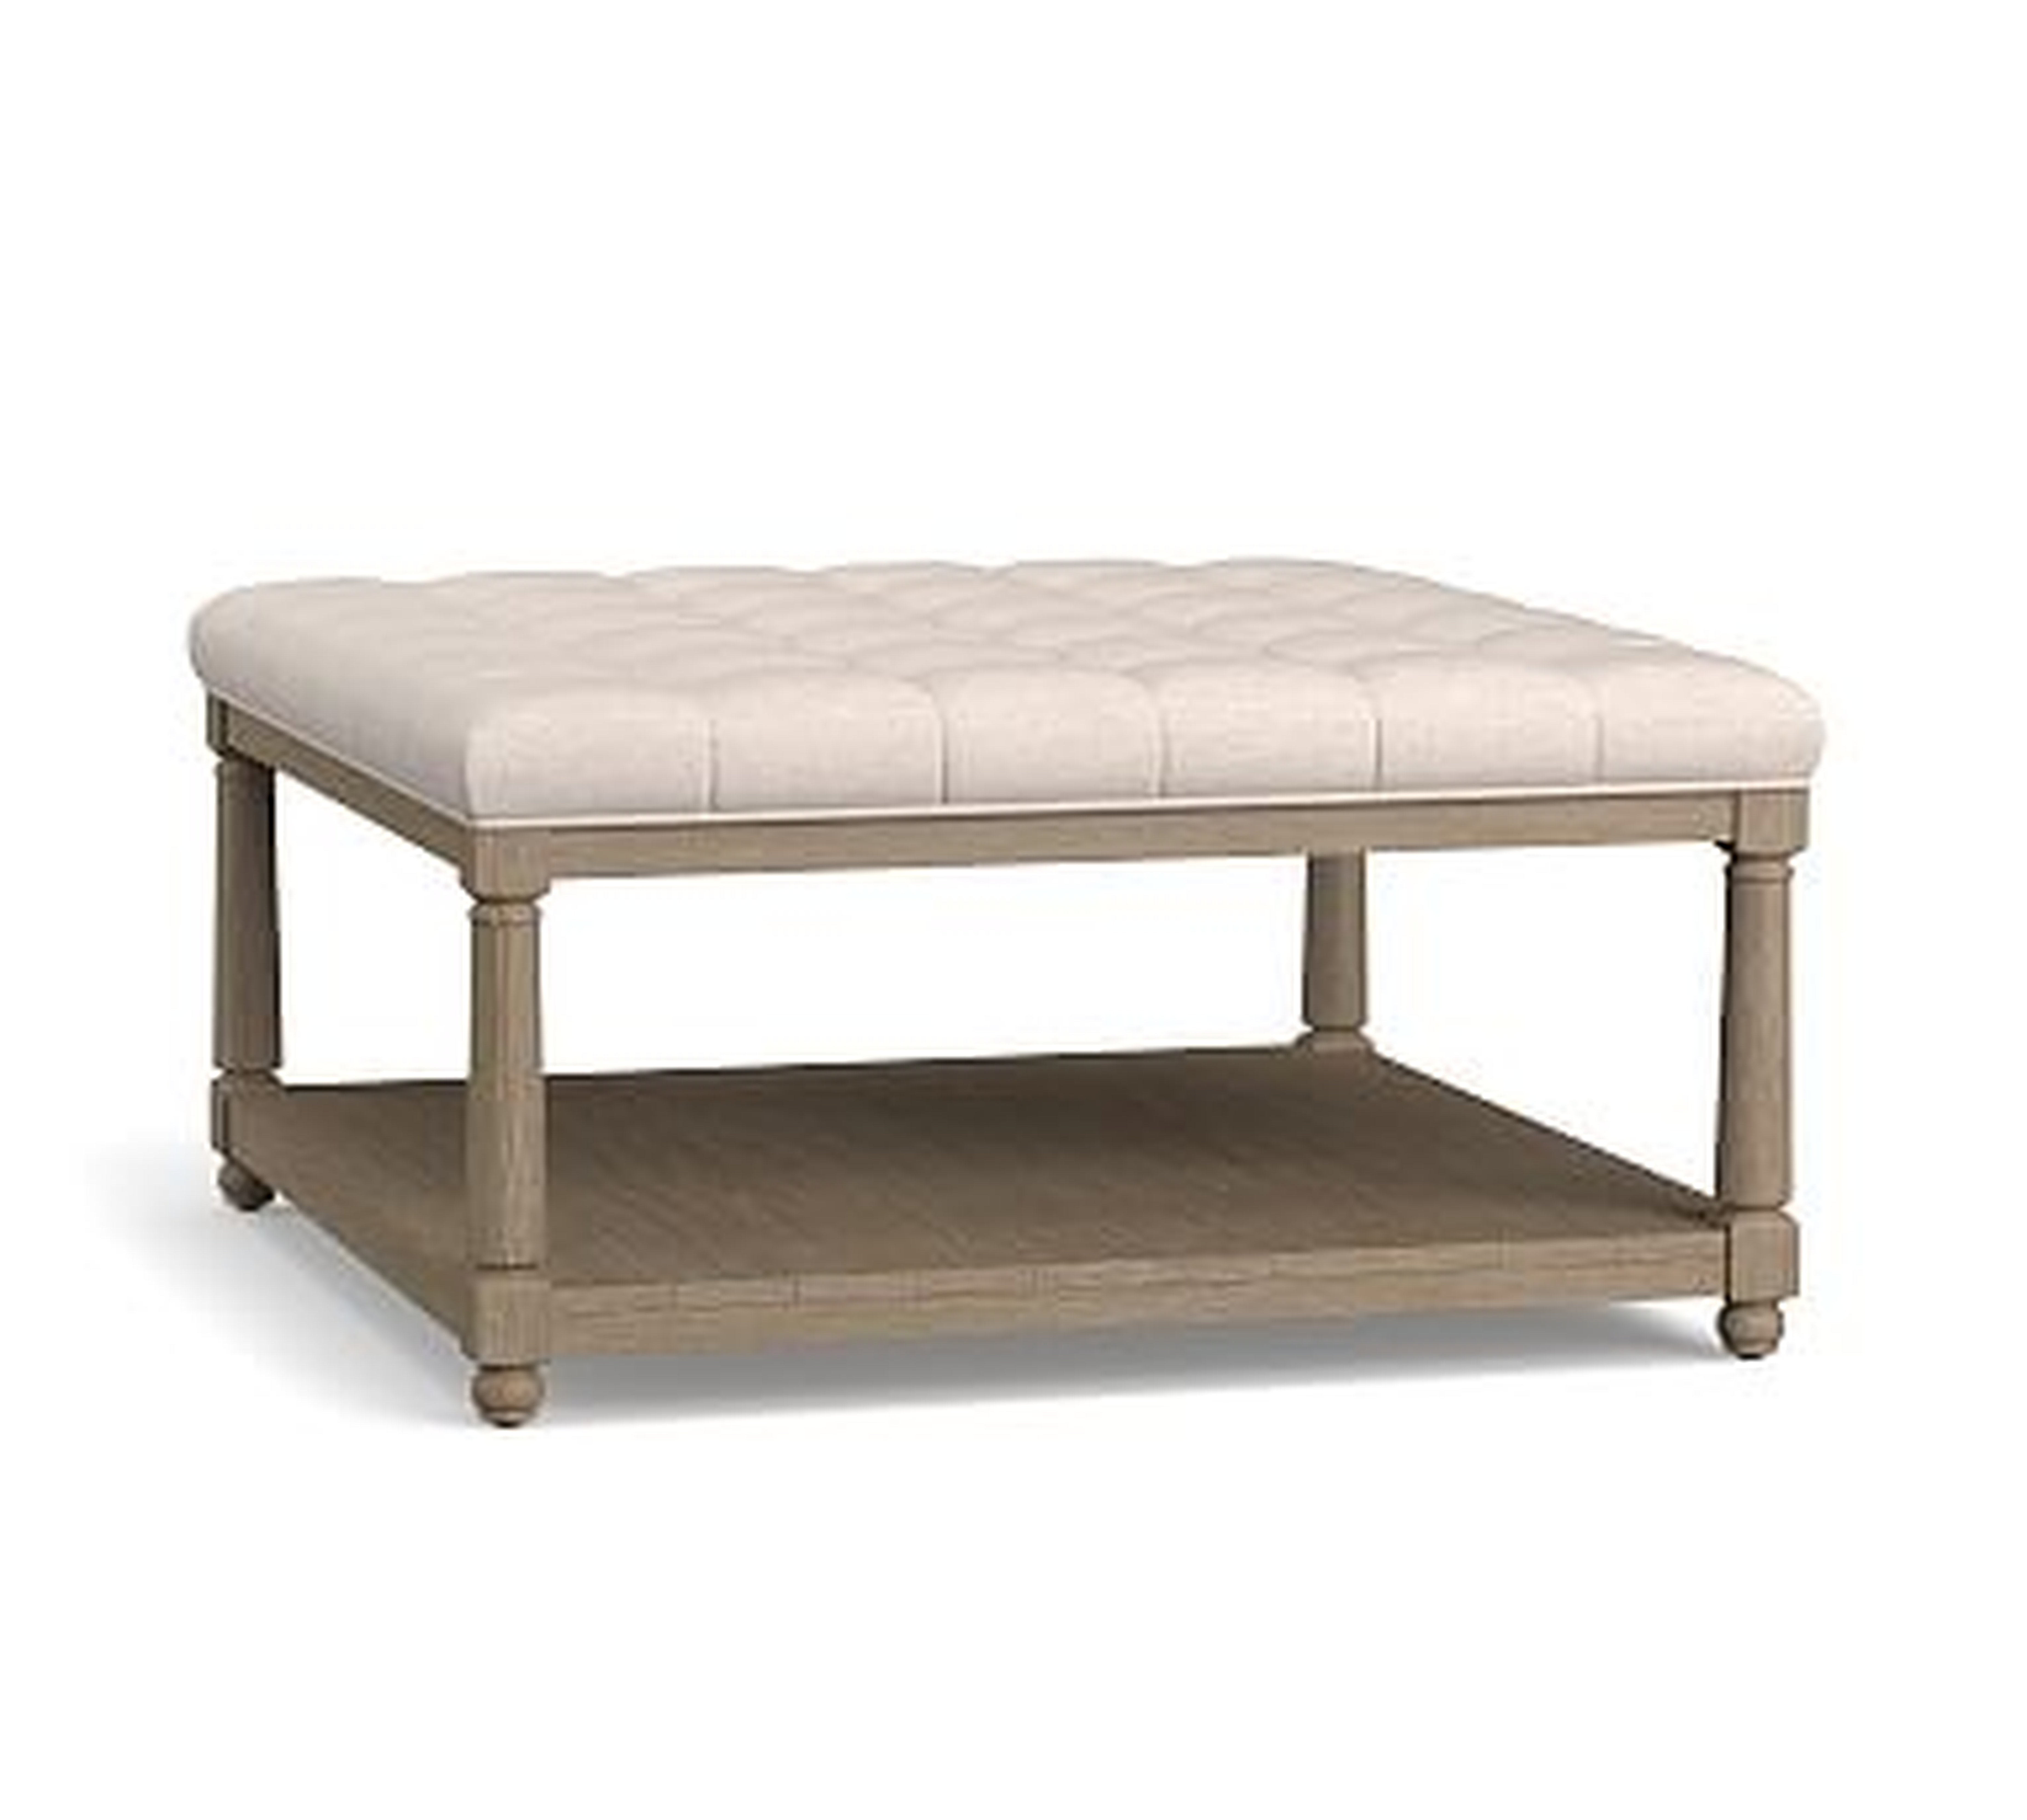 Berlin Upholstered Square Ottoman, Performance Chateau Basketweave Ivory - Pottery Barn